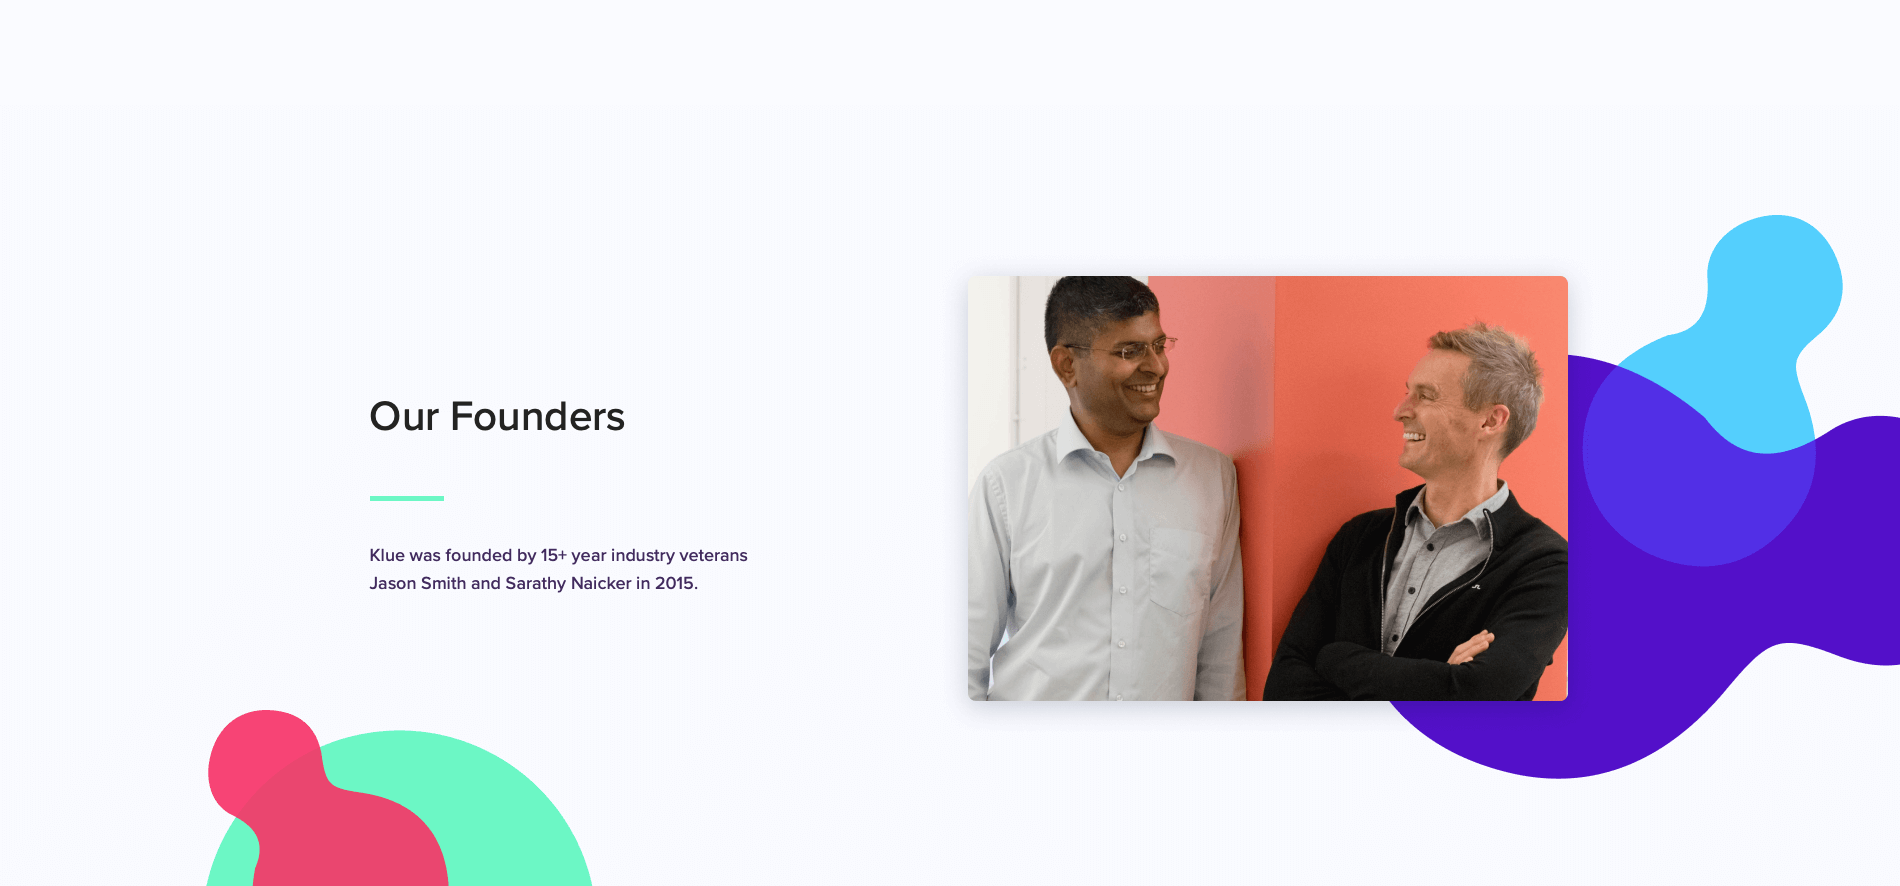 Klue's 'about us' page, which has an image of their founders Jason Smith and Sarathy Naicker laughing with each other. The background had colorful shapes in theme with their homepage.